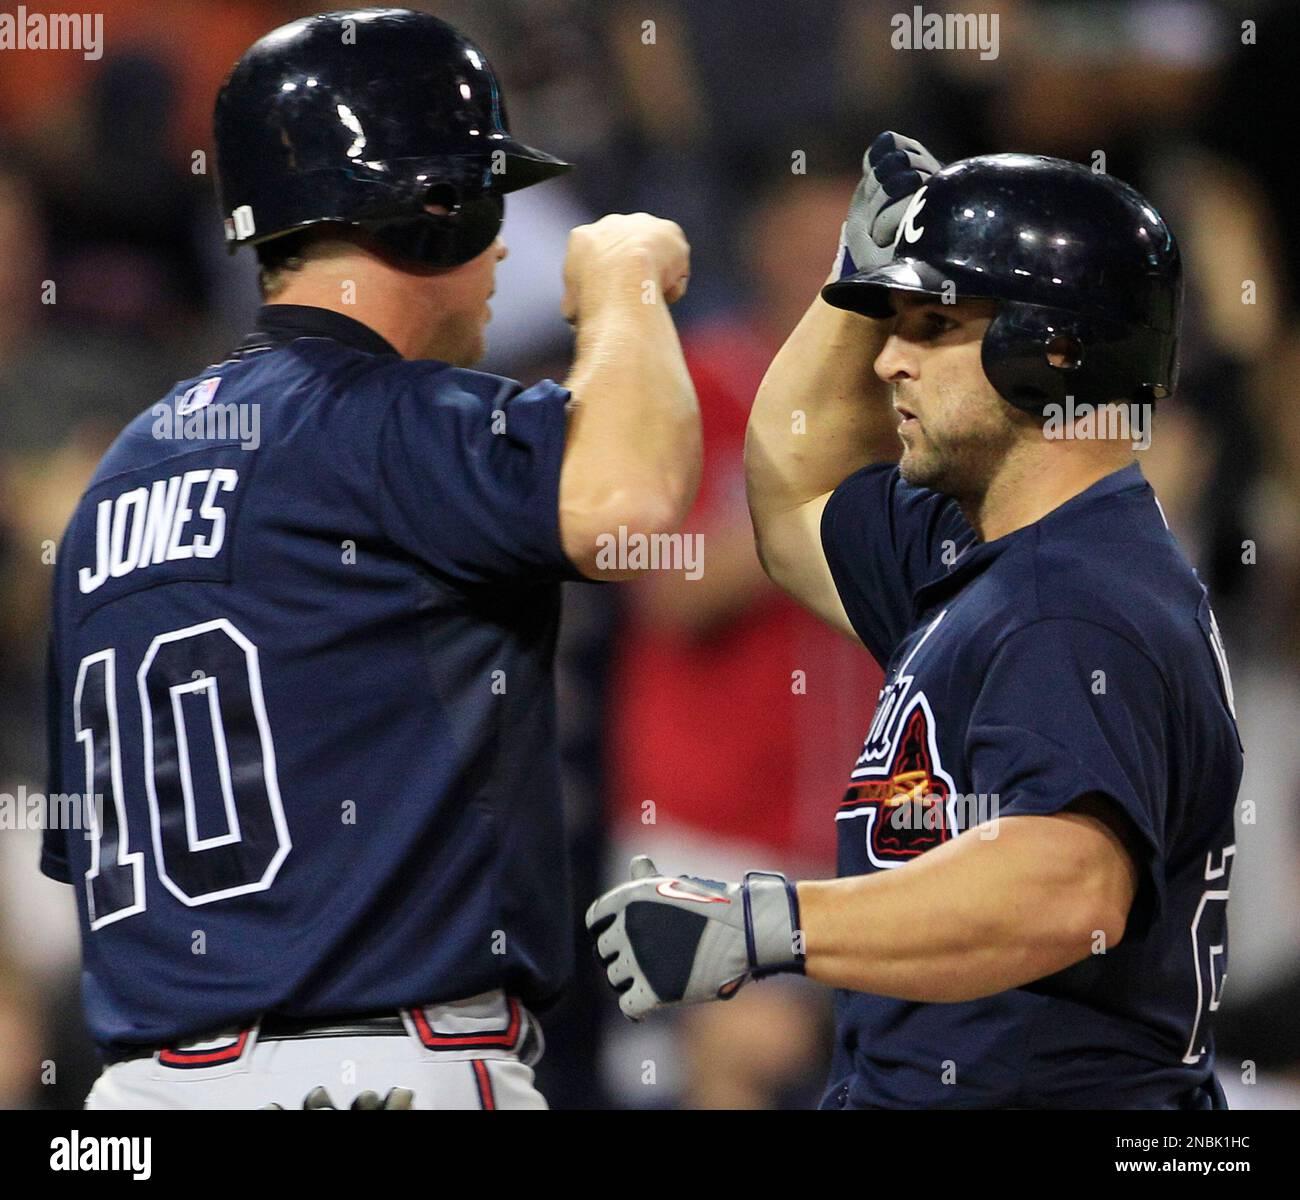 Atlanta Braves' Dan Uggla, right, bangs forearms with Chipper Jones after  Uggla's three-run home run against the San Diego Padres in the ninth inning  of the Braves' 10-1 victory in a baseball